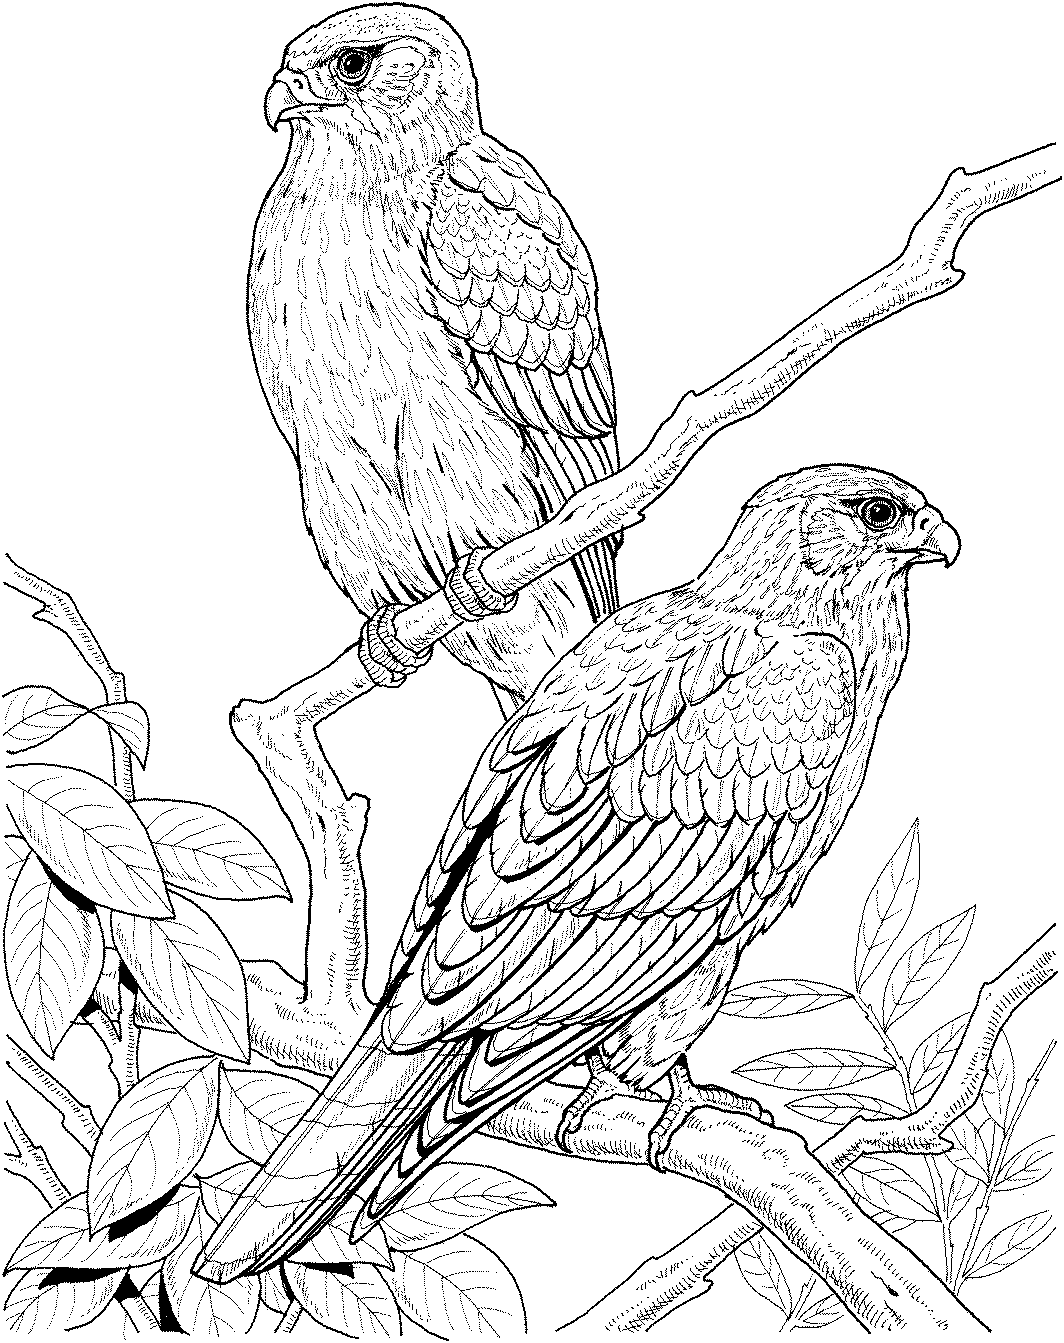 Printable Realistic Bird Coloring Pages - High Quality Coloring Pages